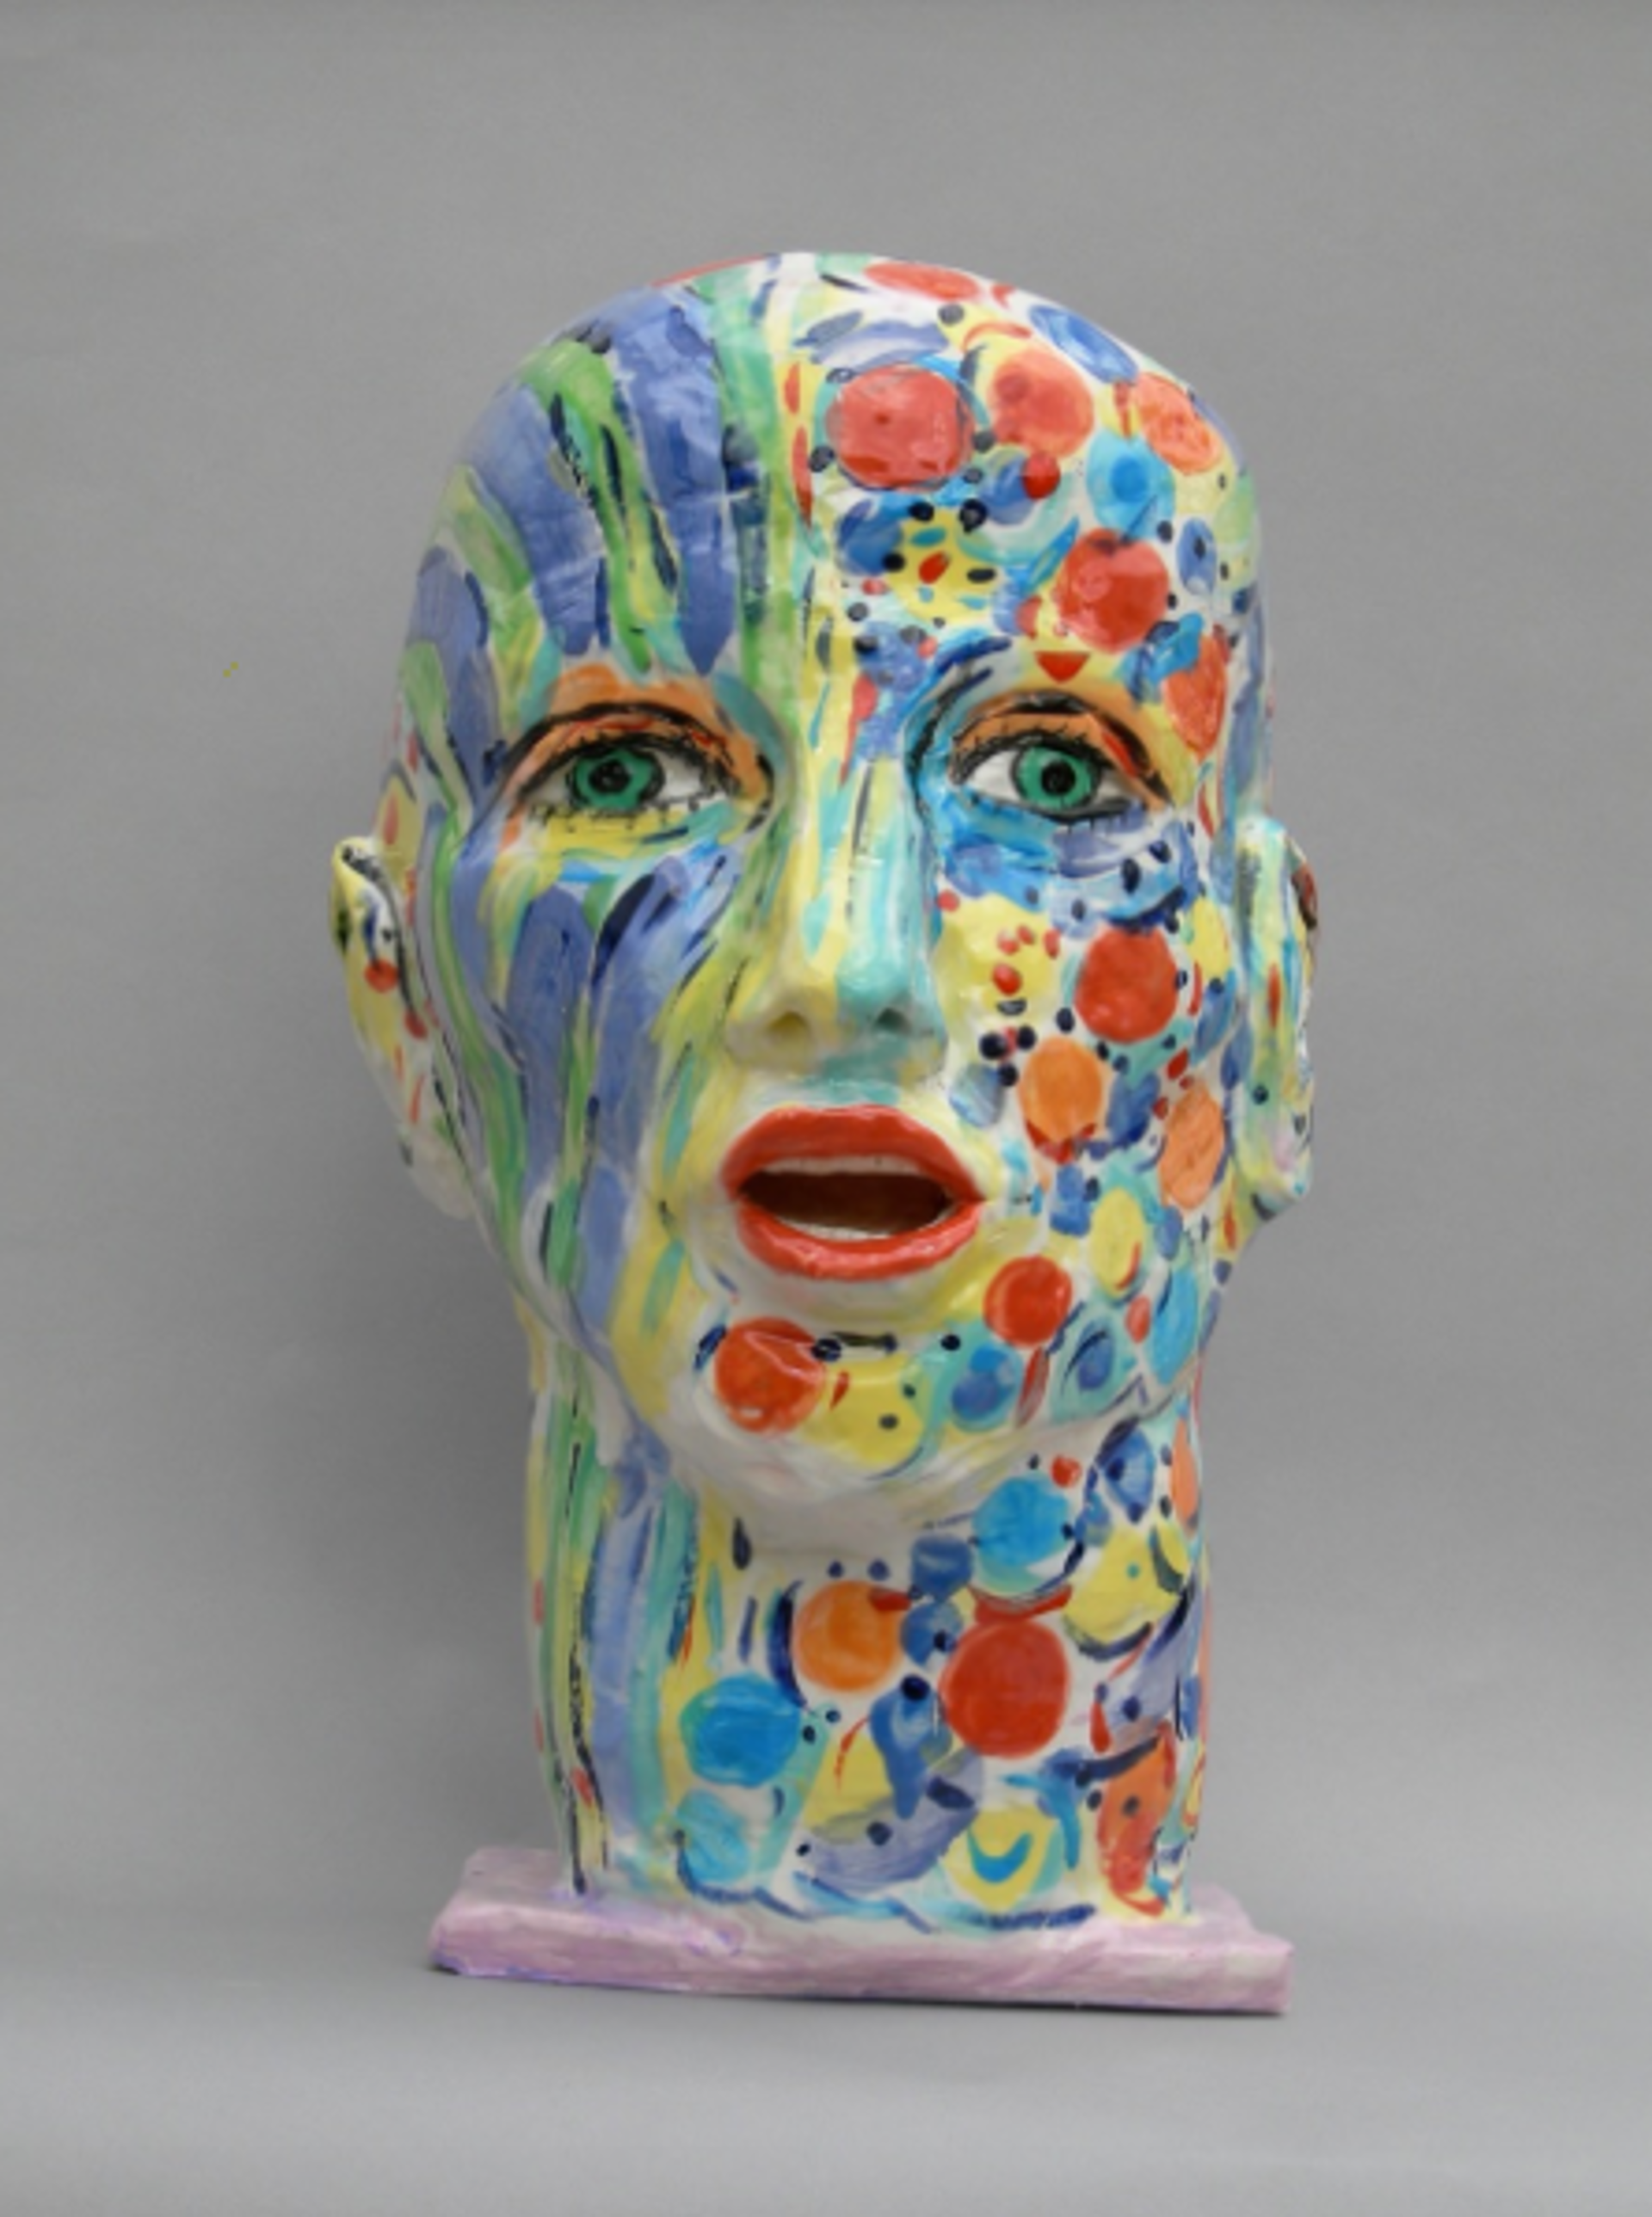 Patterned Head 1 by Linda Smith